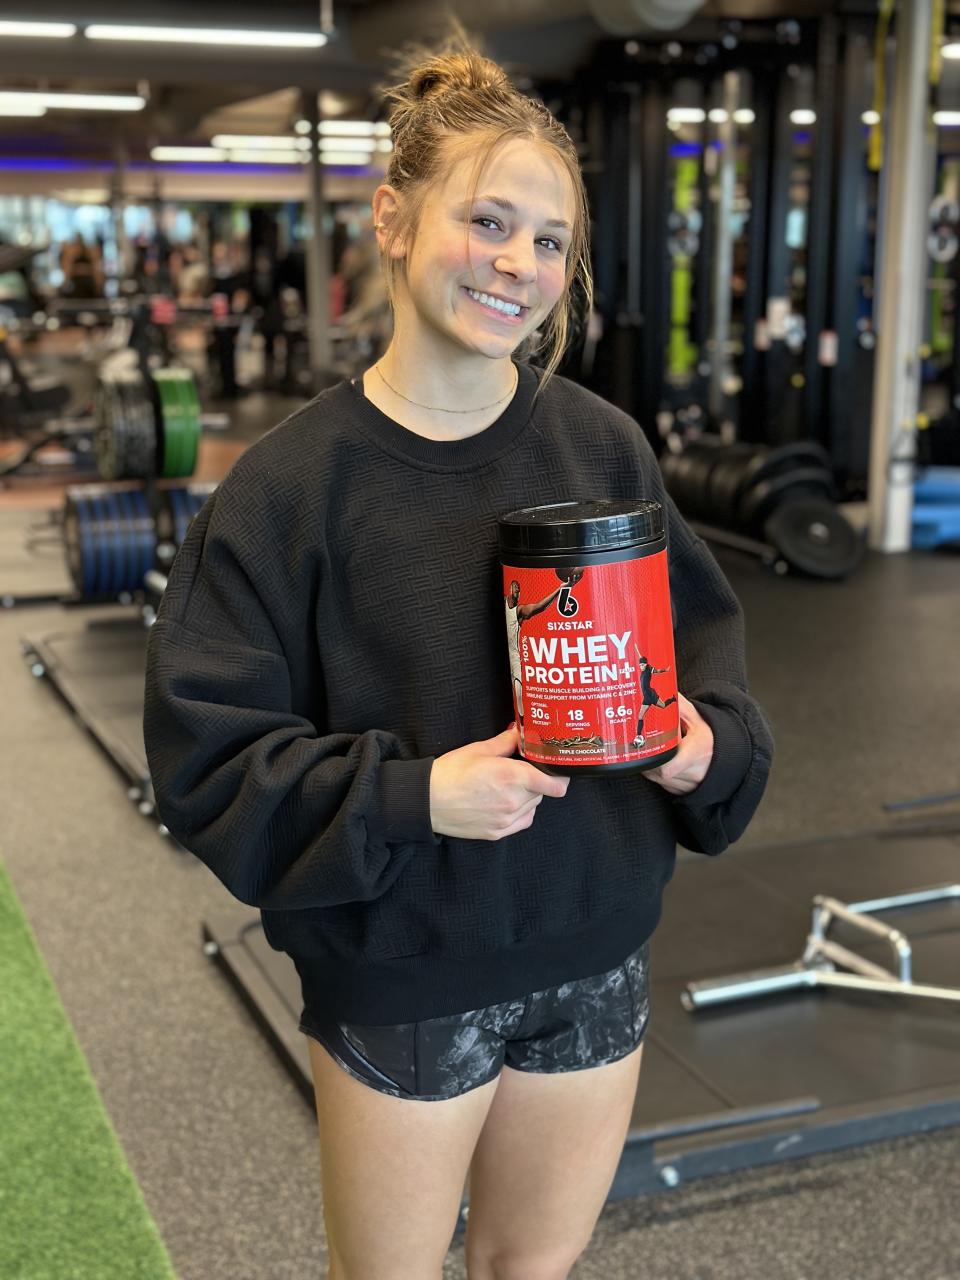 As part of her agreement with Six Star Pro Nutrition®, Frey will become an ambassador for Six Star® 100% Whey Protein Plus in all of its flavors. Since 2021, the brand has made high school sports a top priority, including school-wide partnerships with athletic departments in 15 different states. She joins Pro Football All-Pro T.J. Watt and U.S. soccer sensation Kristie Mewis as current Six Star® ambassadors.